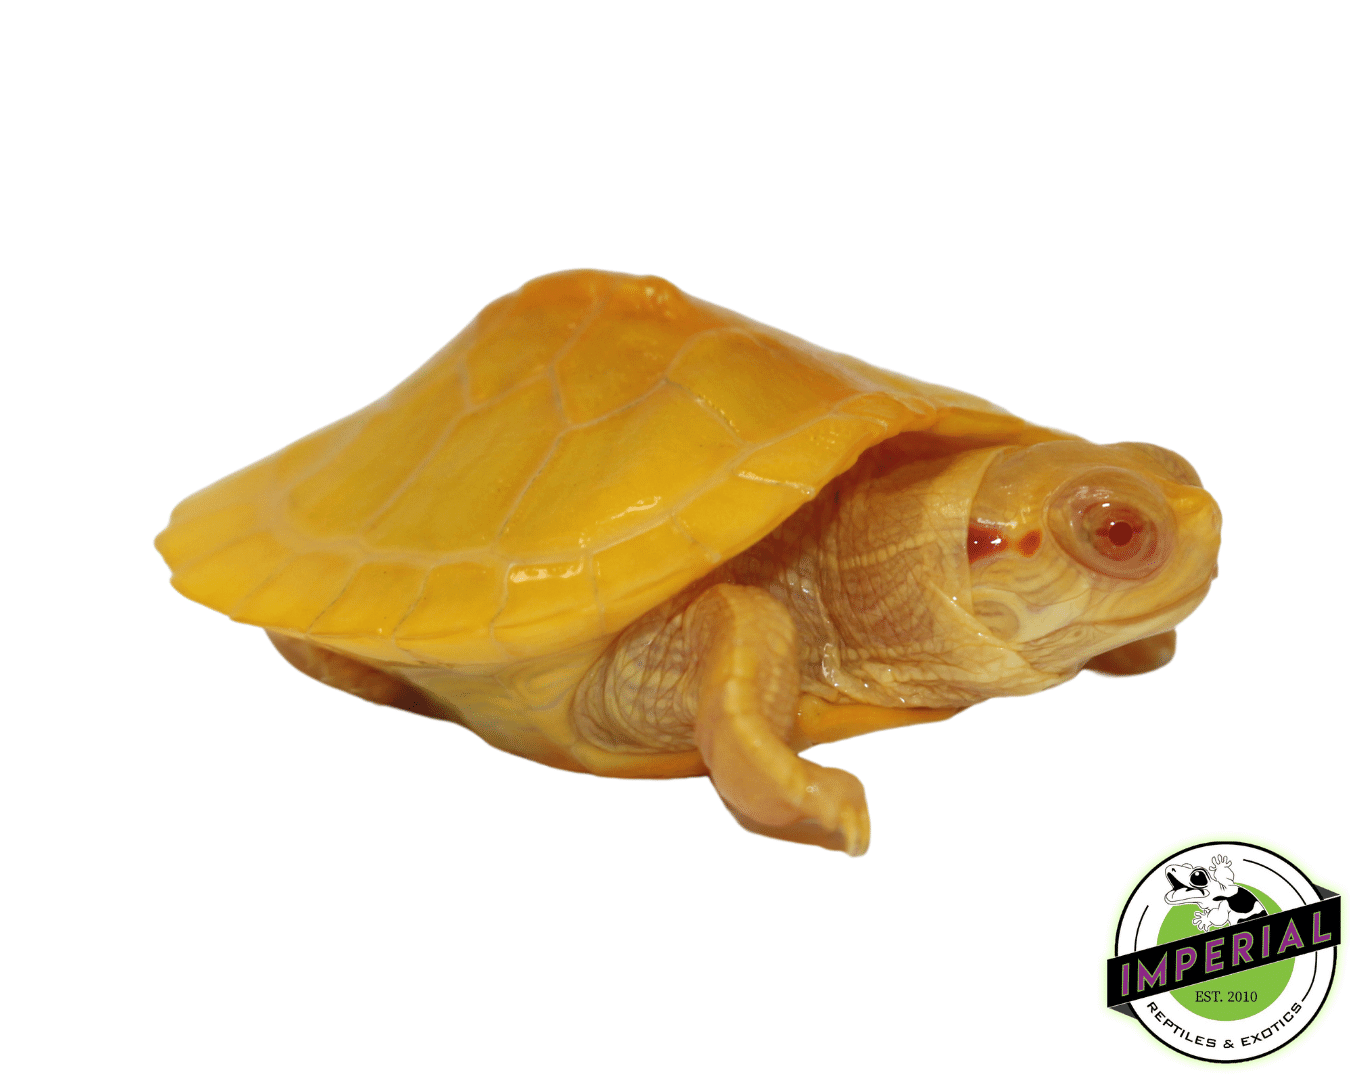 albino red ear slider turtle for sale, buy reptiles online